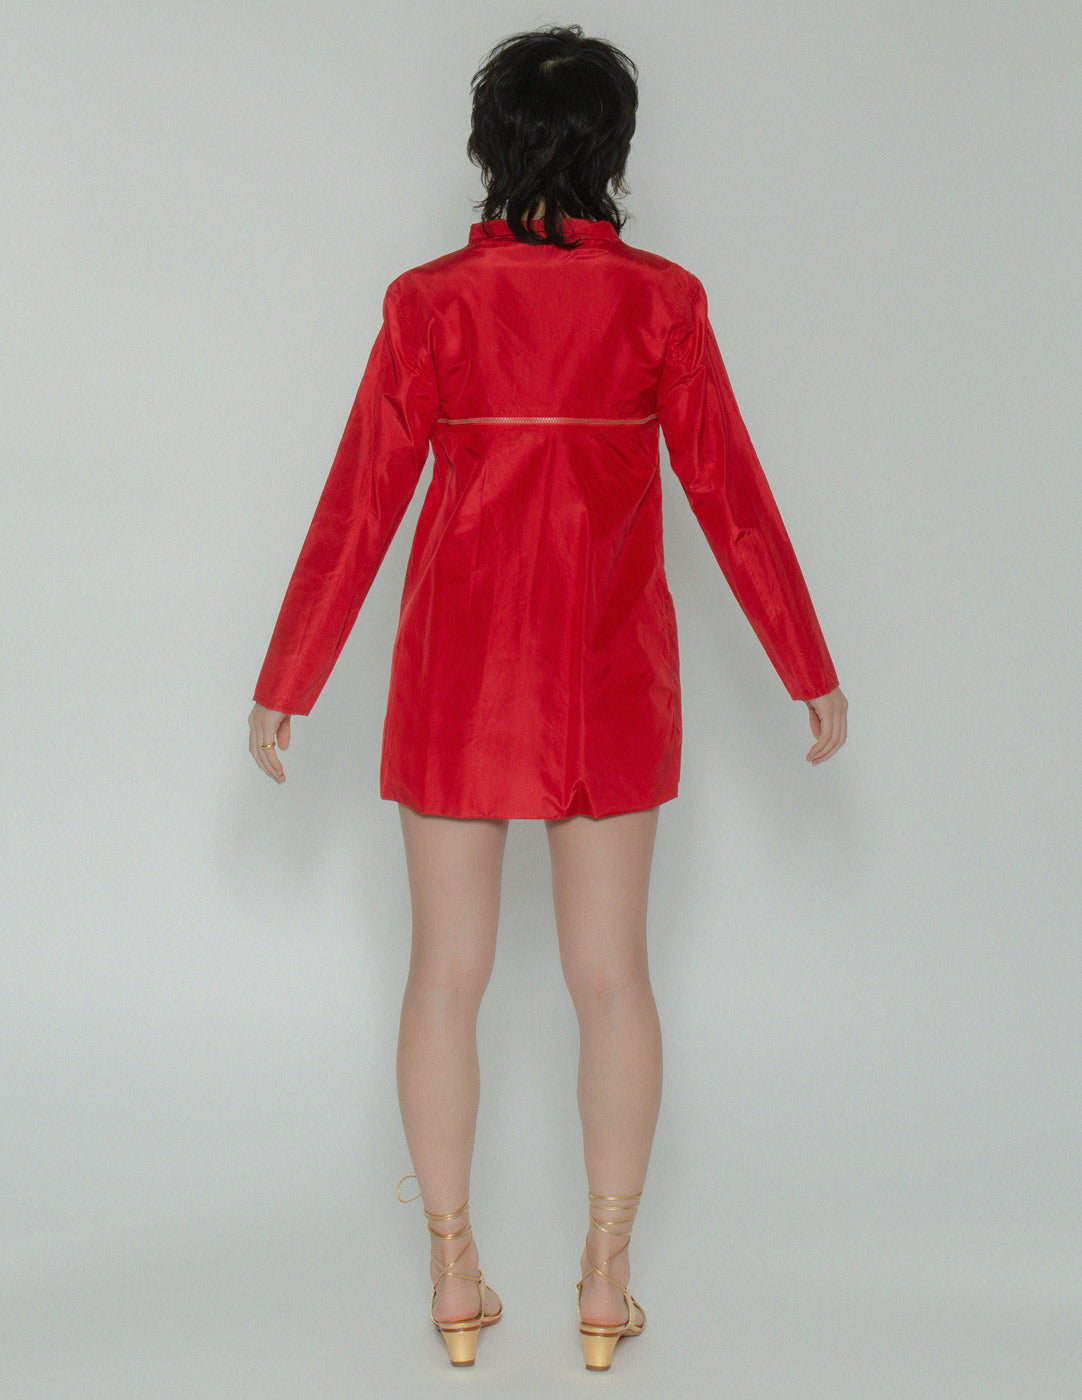 Prada vintage red convertible duster short back view